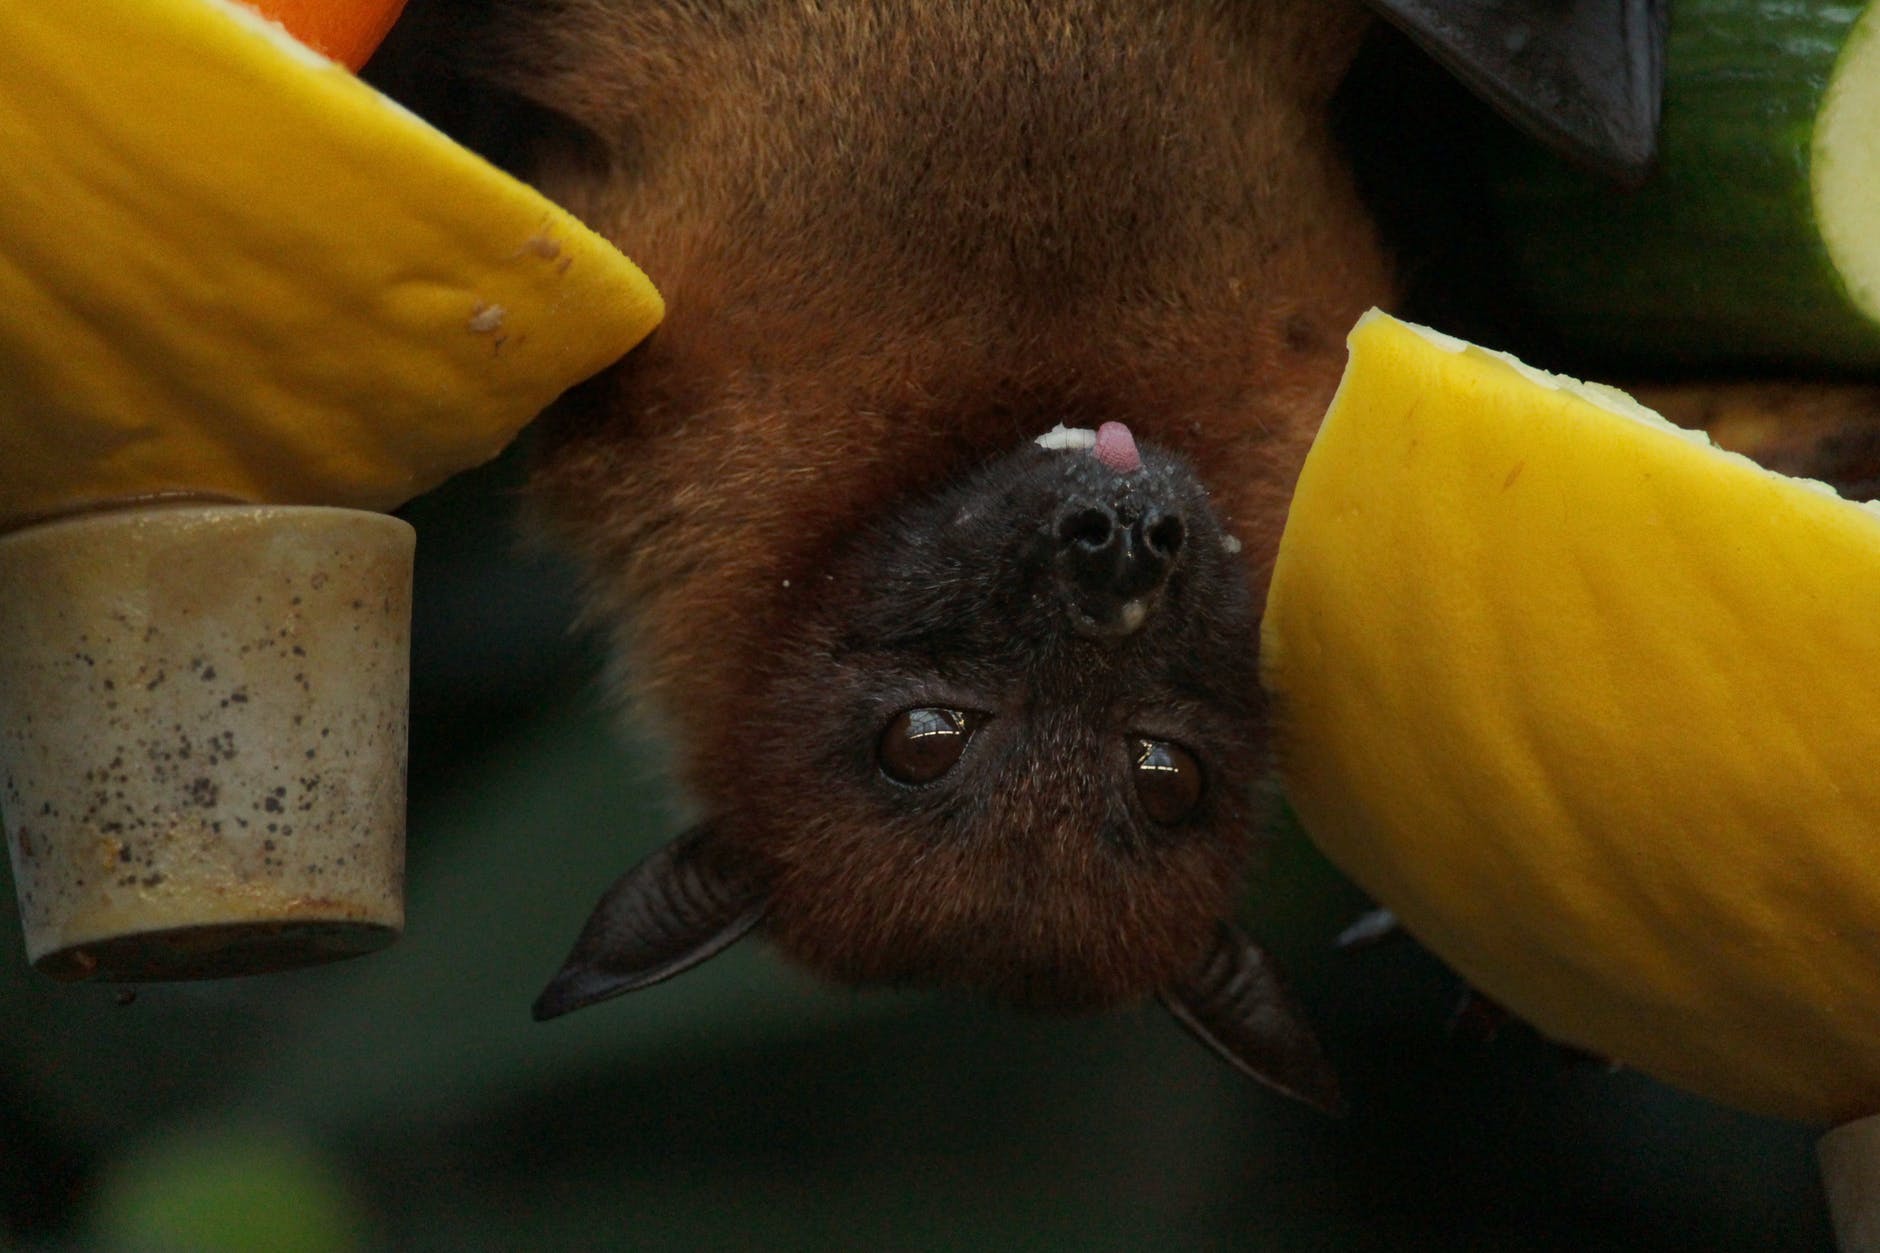 What Options Does A Homeowner Have For Humane Bat Removal?